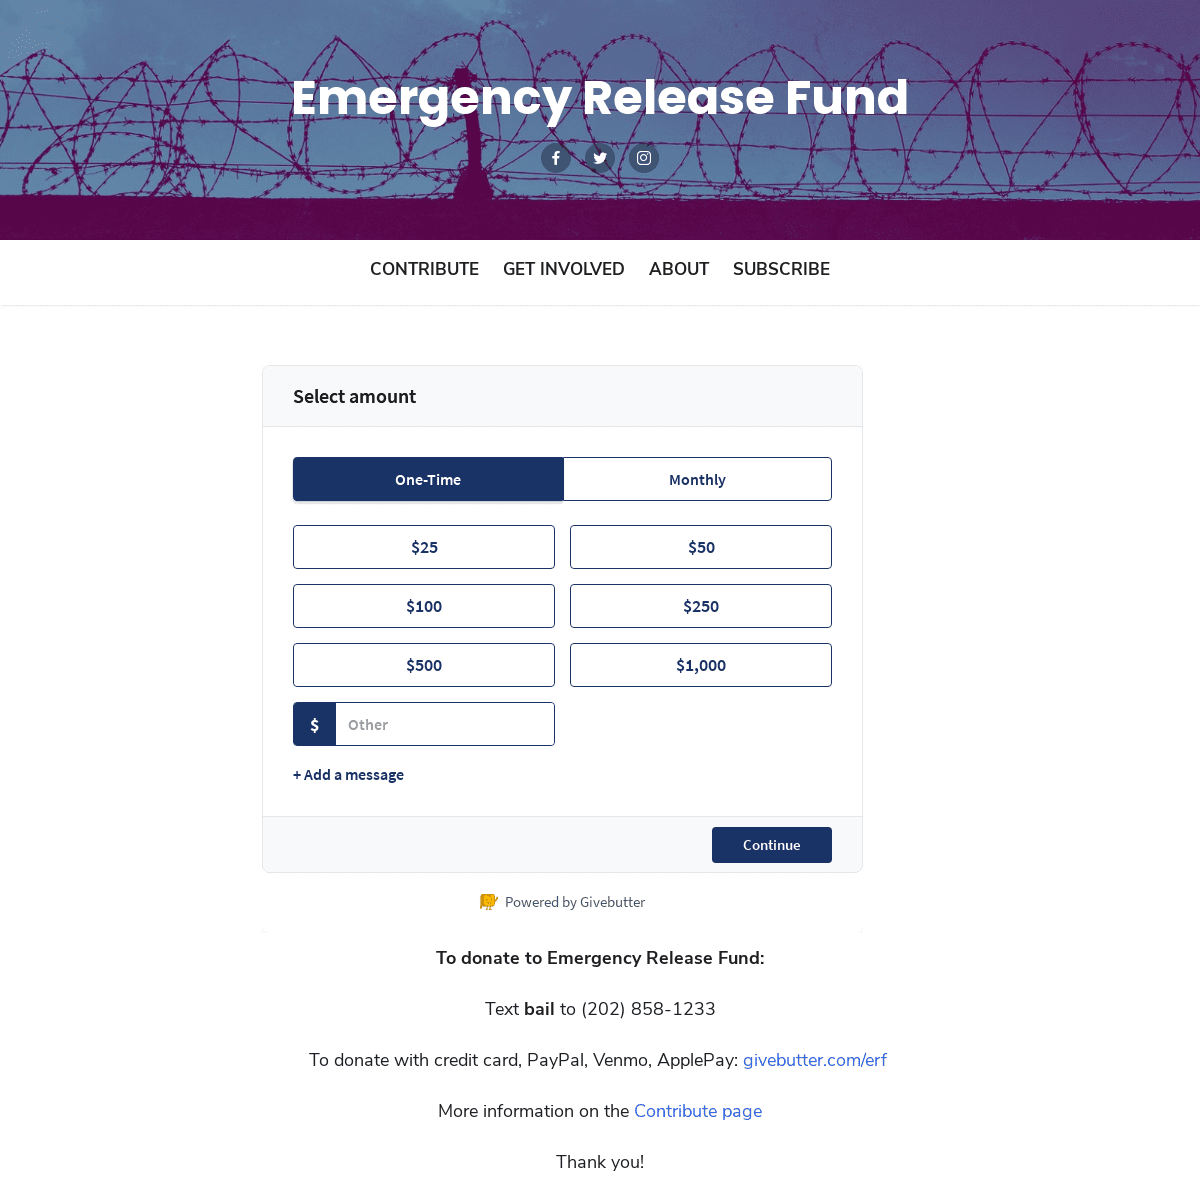 A complete backup of https://emergencyreleasefund.com